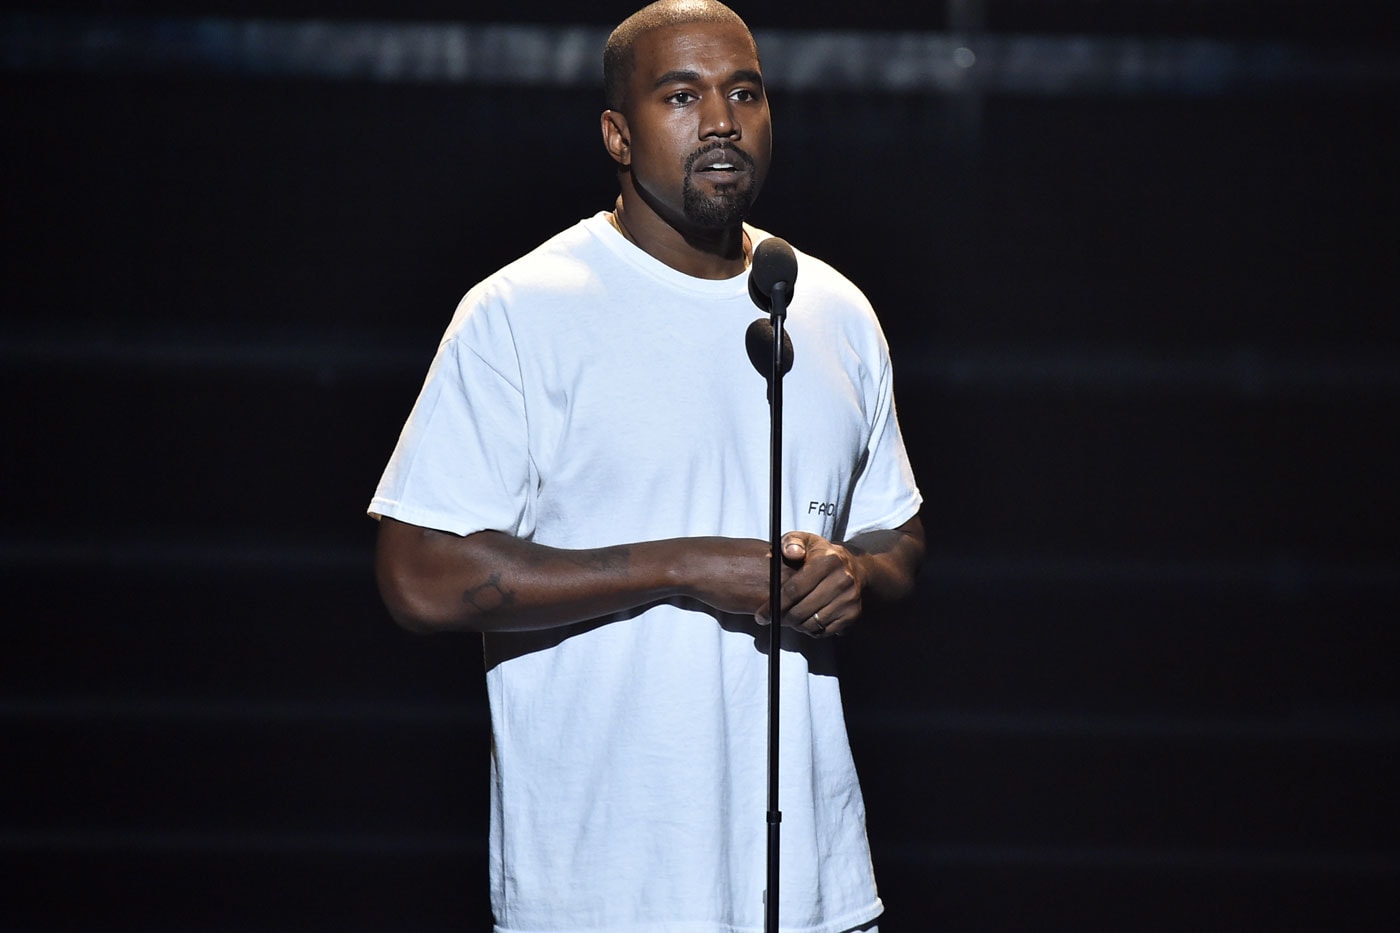 Twitter Reacts to Kanye West's 2020 Presidency Announcement